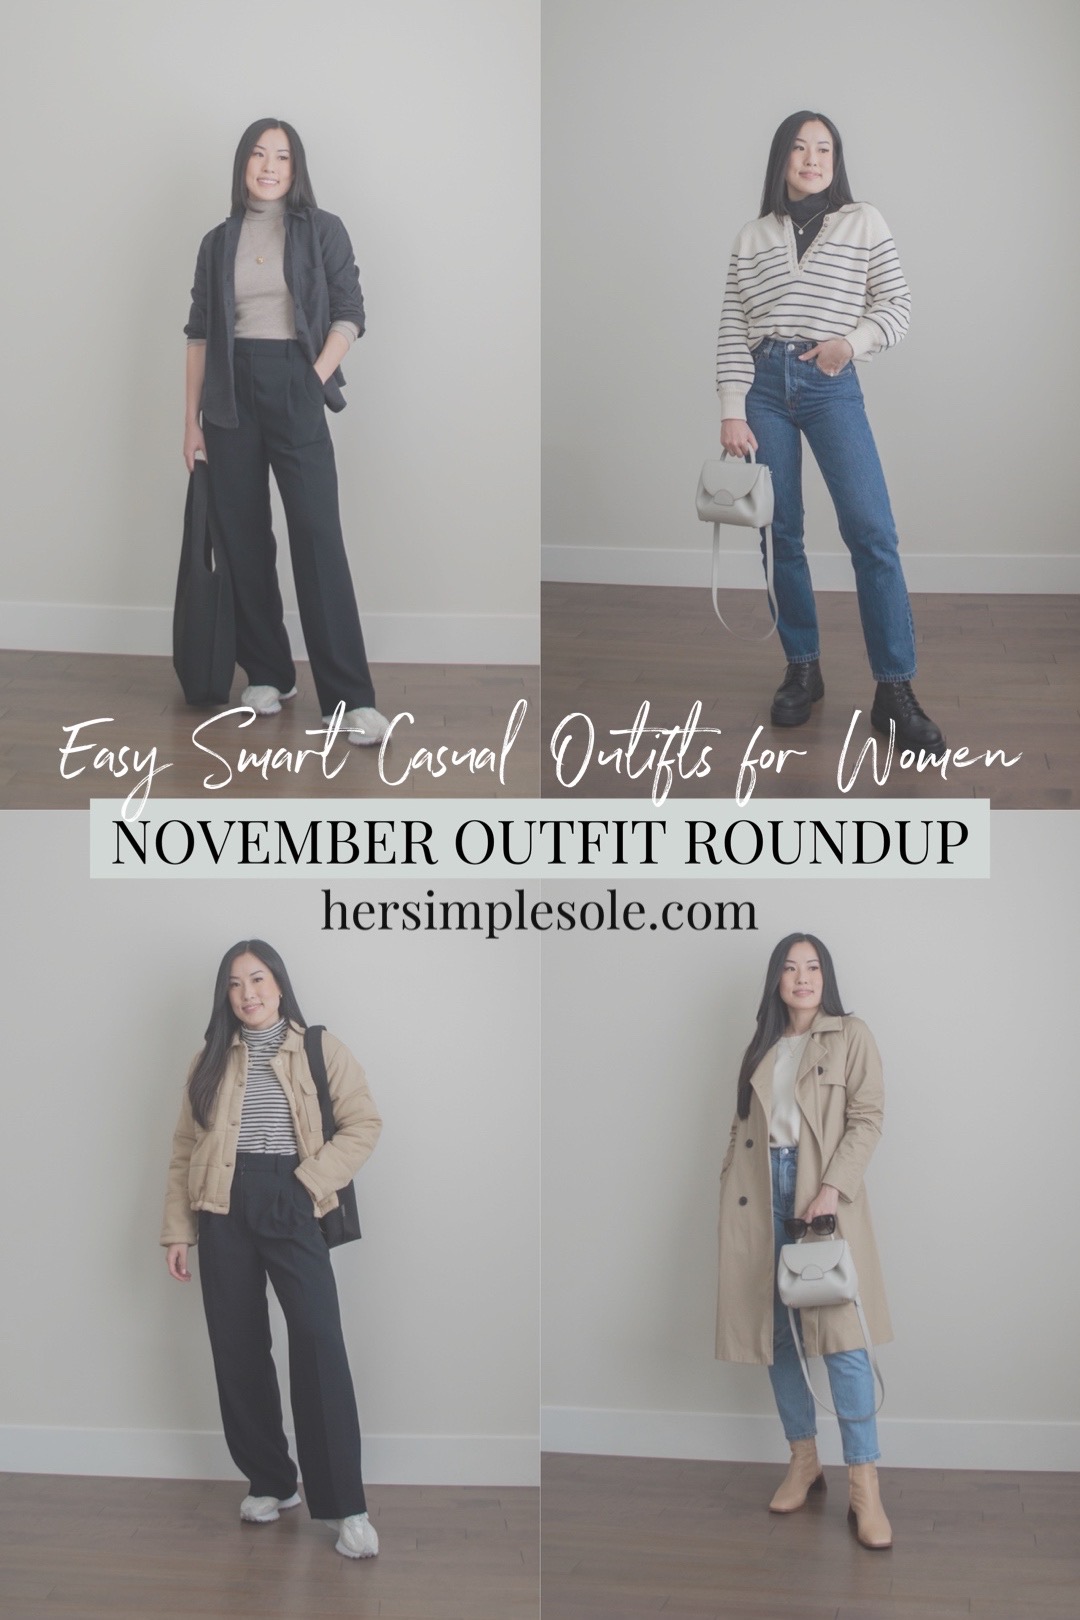 Her Simple Sole - Easy Smart Casual Outfits for Women - November Outfit Roundup, fall outfit ideas, neutral late fall and early winter outfit ideas